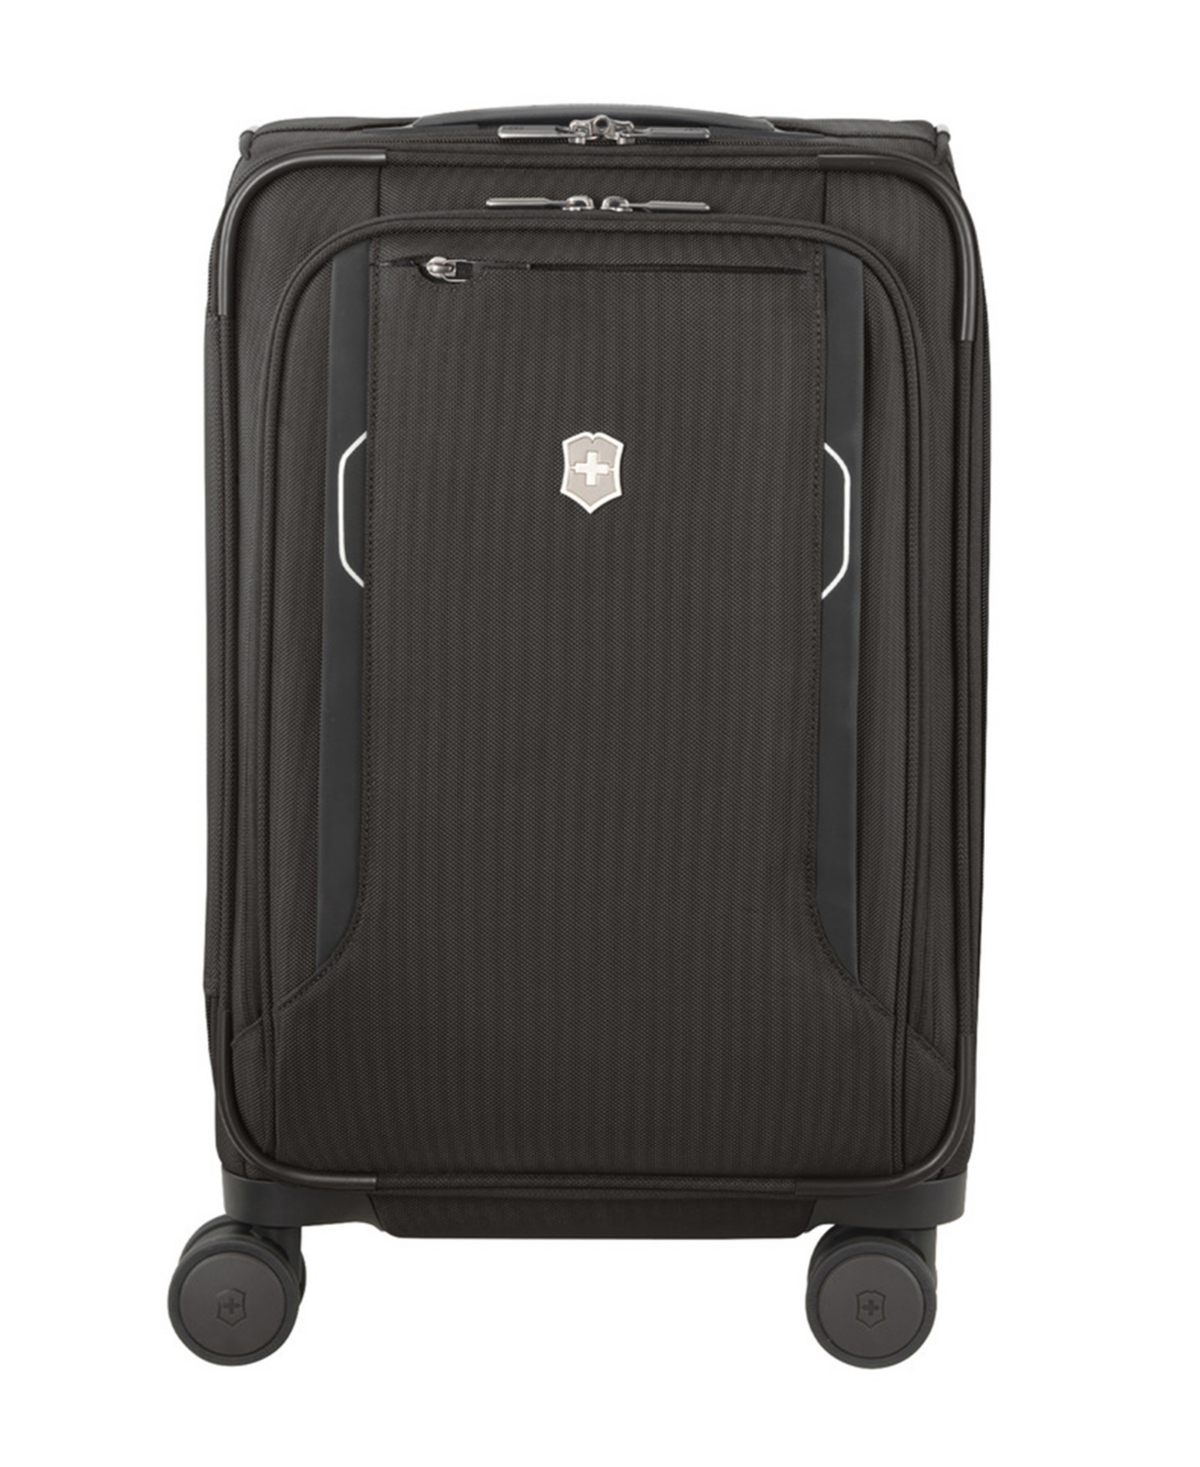 Werks 6.0 Frequent Flyer 21" Carry-On Softside Suitcase - Blue